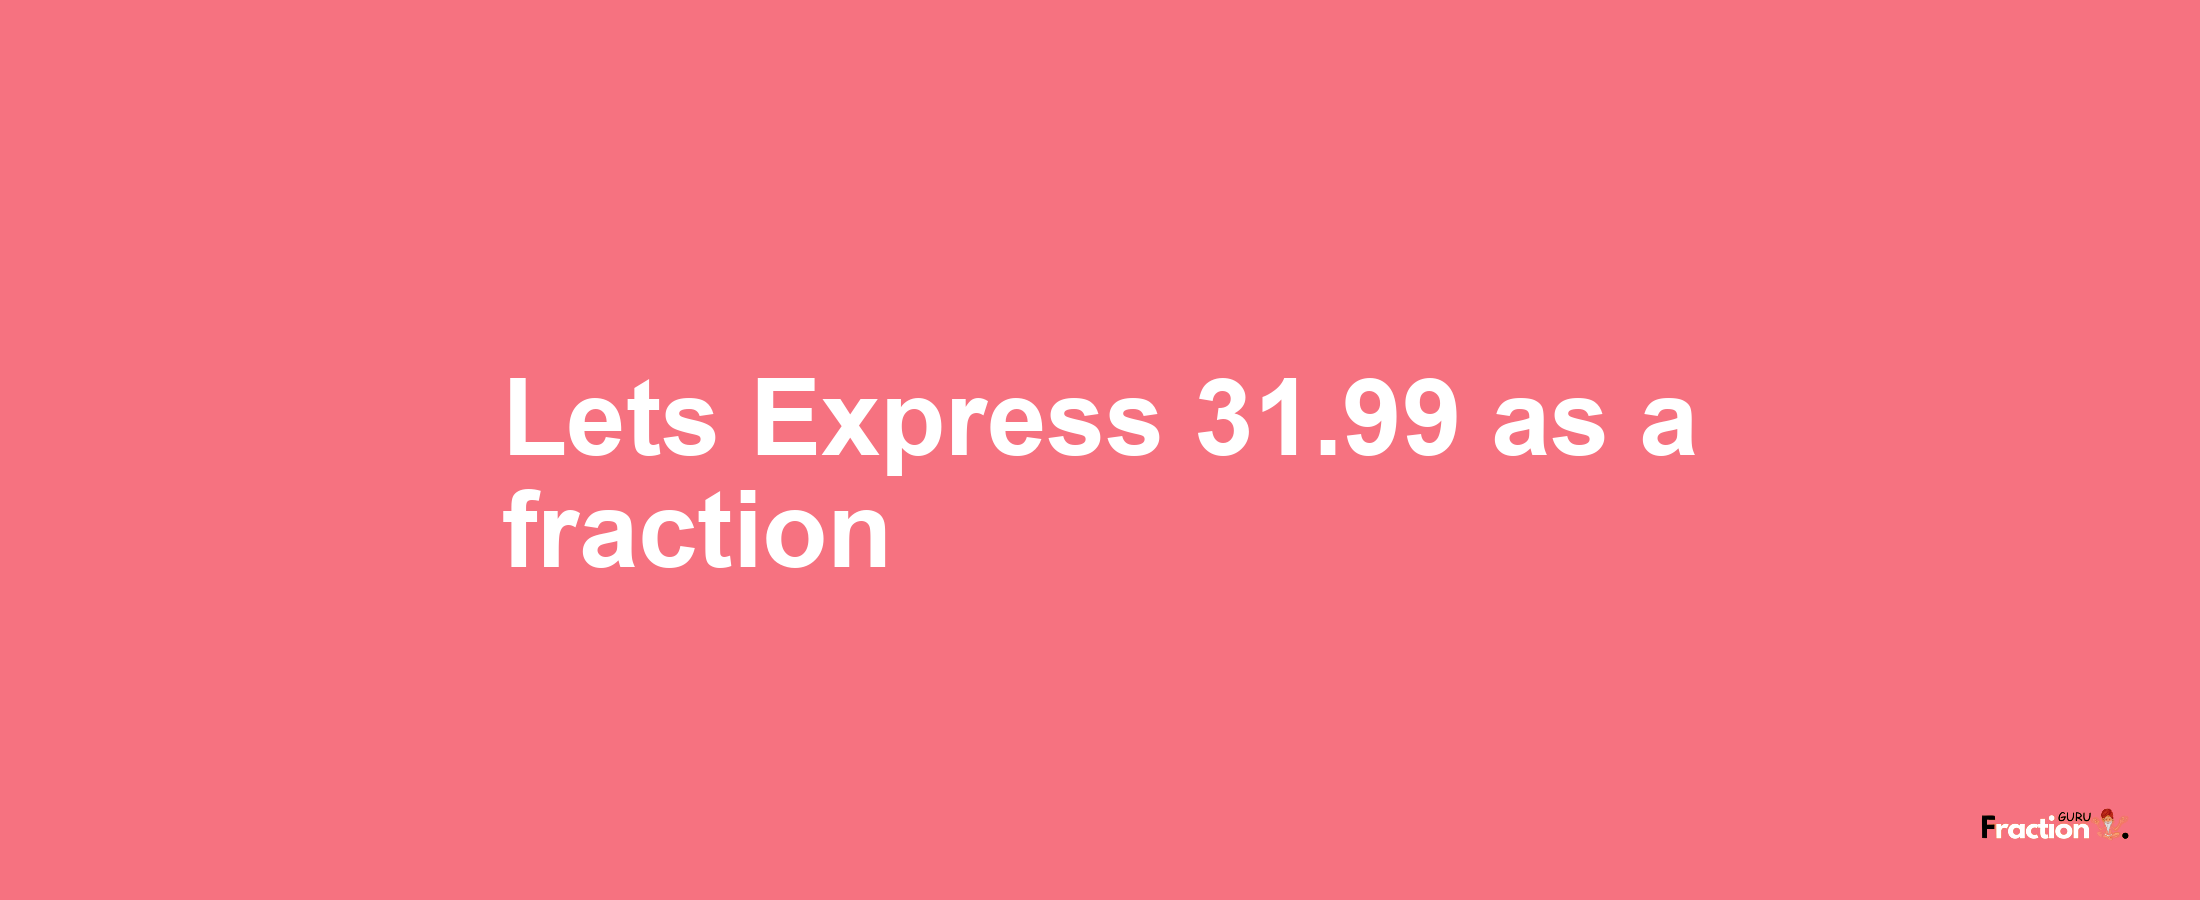 Lets Express 31.99 as afraction